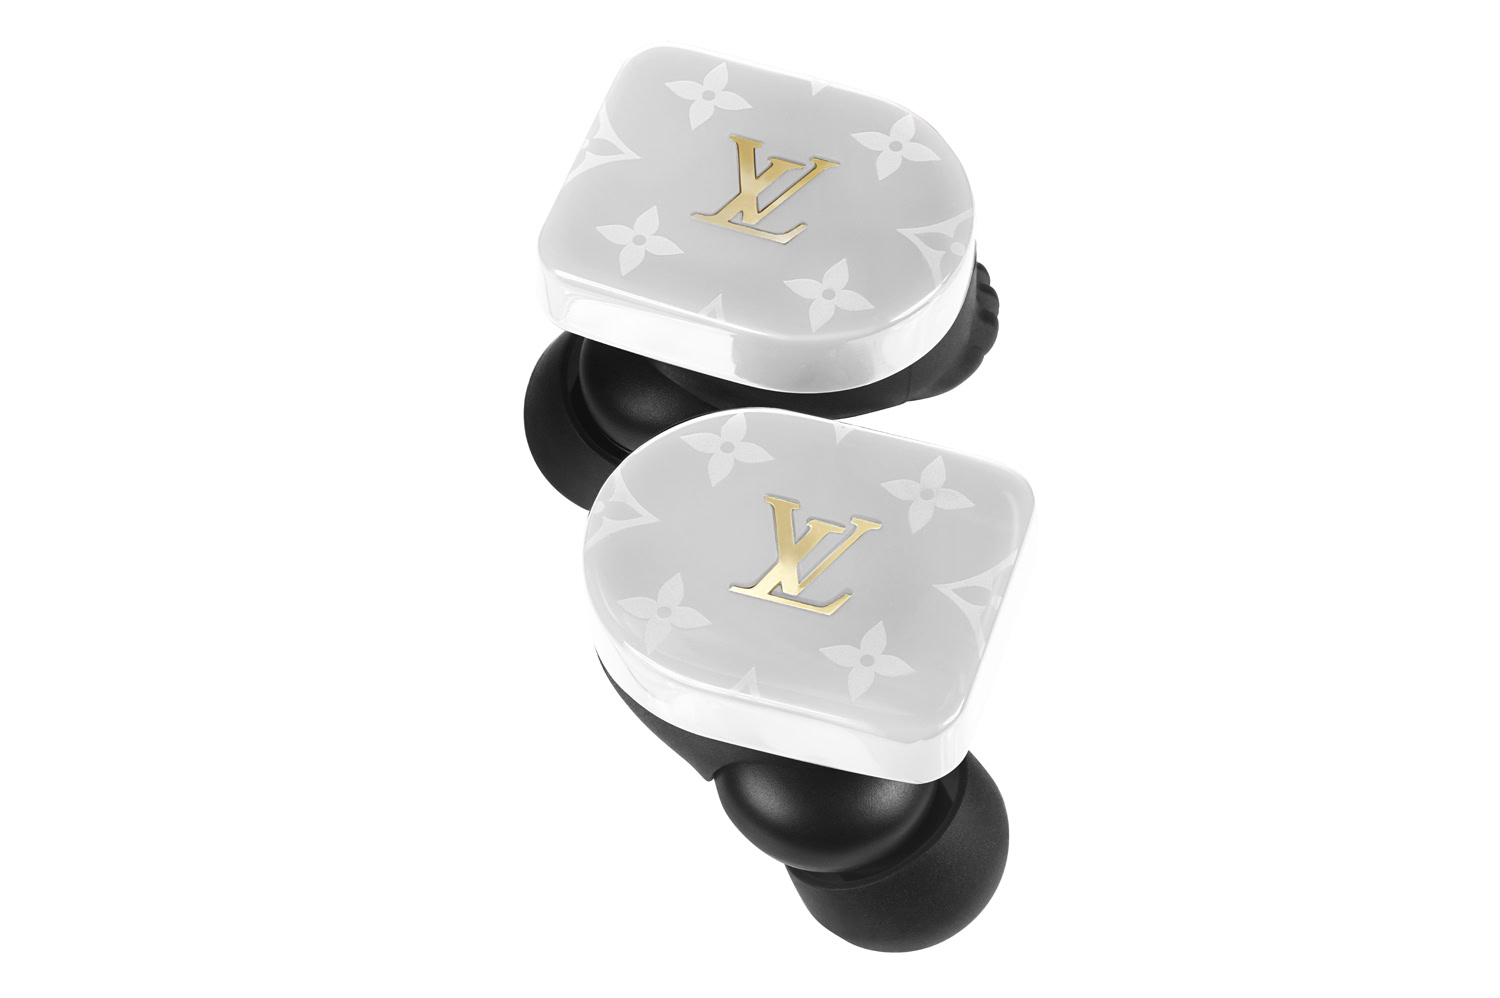 Louis Vuitton's new wireless earbuds cost $1,000 — as dumb as it sounds - Android